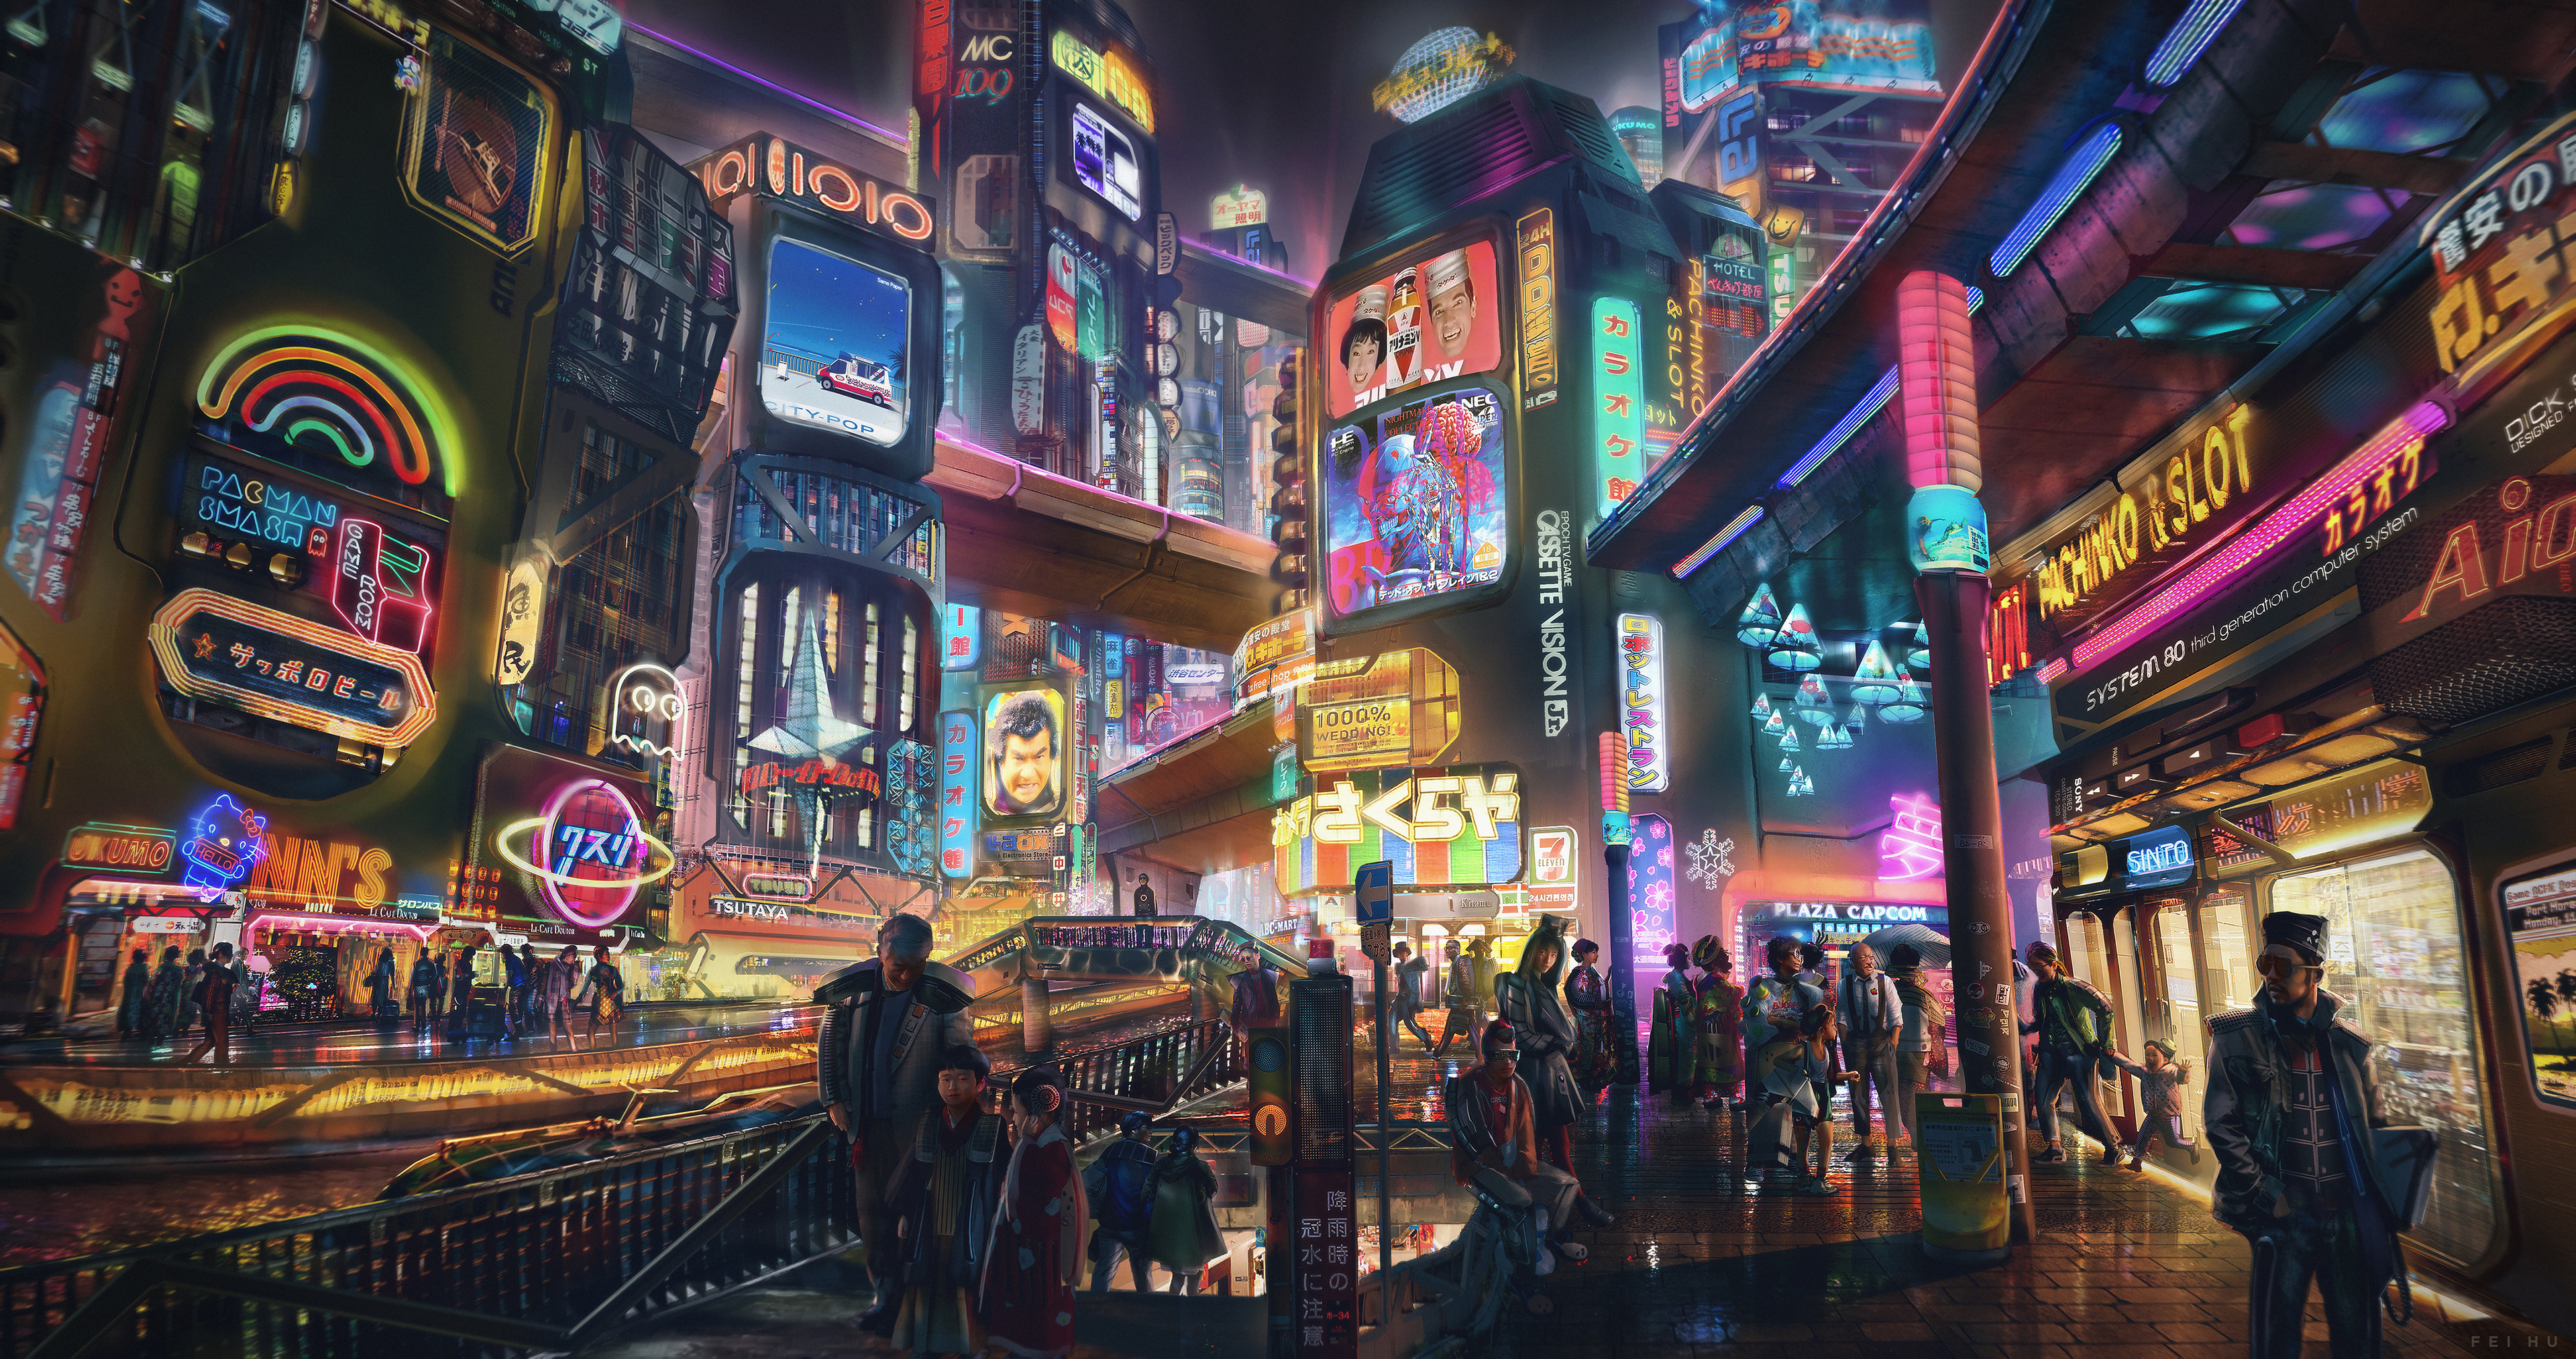 Night life of the alternate 80s central Tokyo with an abundance of neon lights